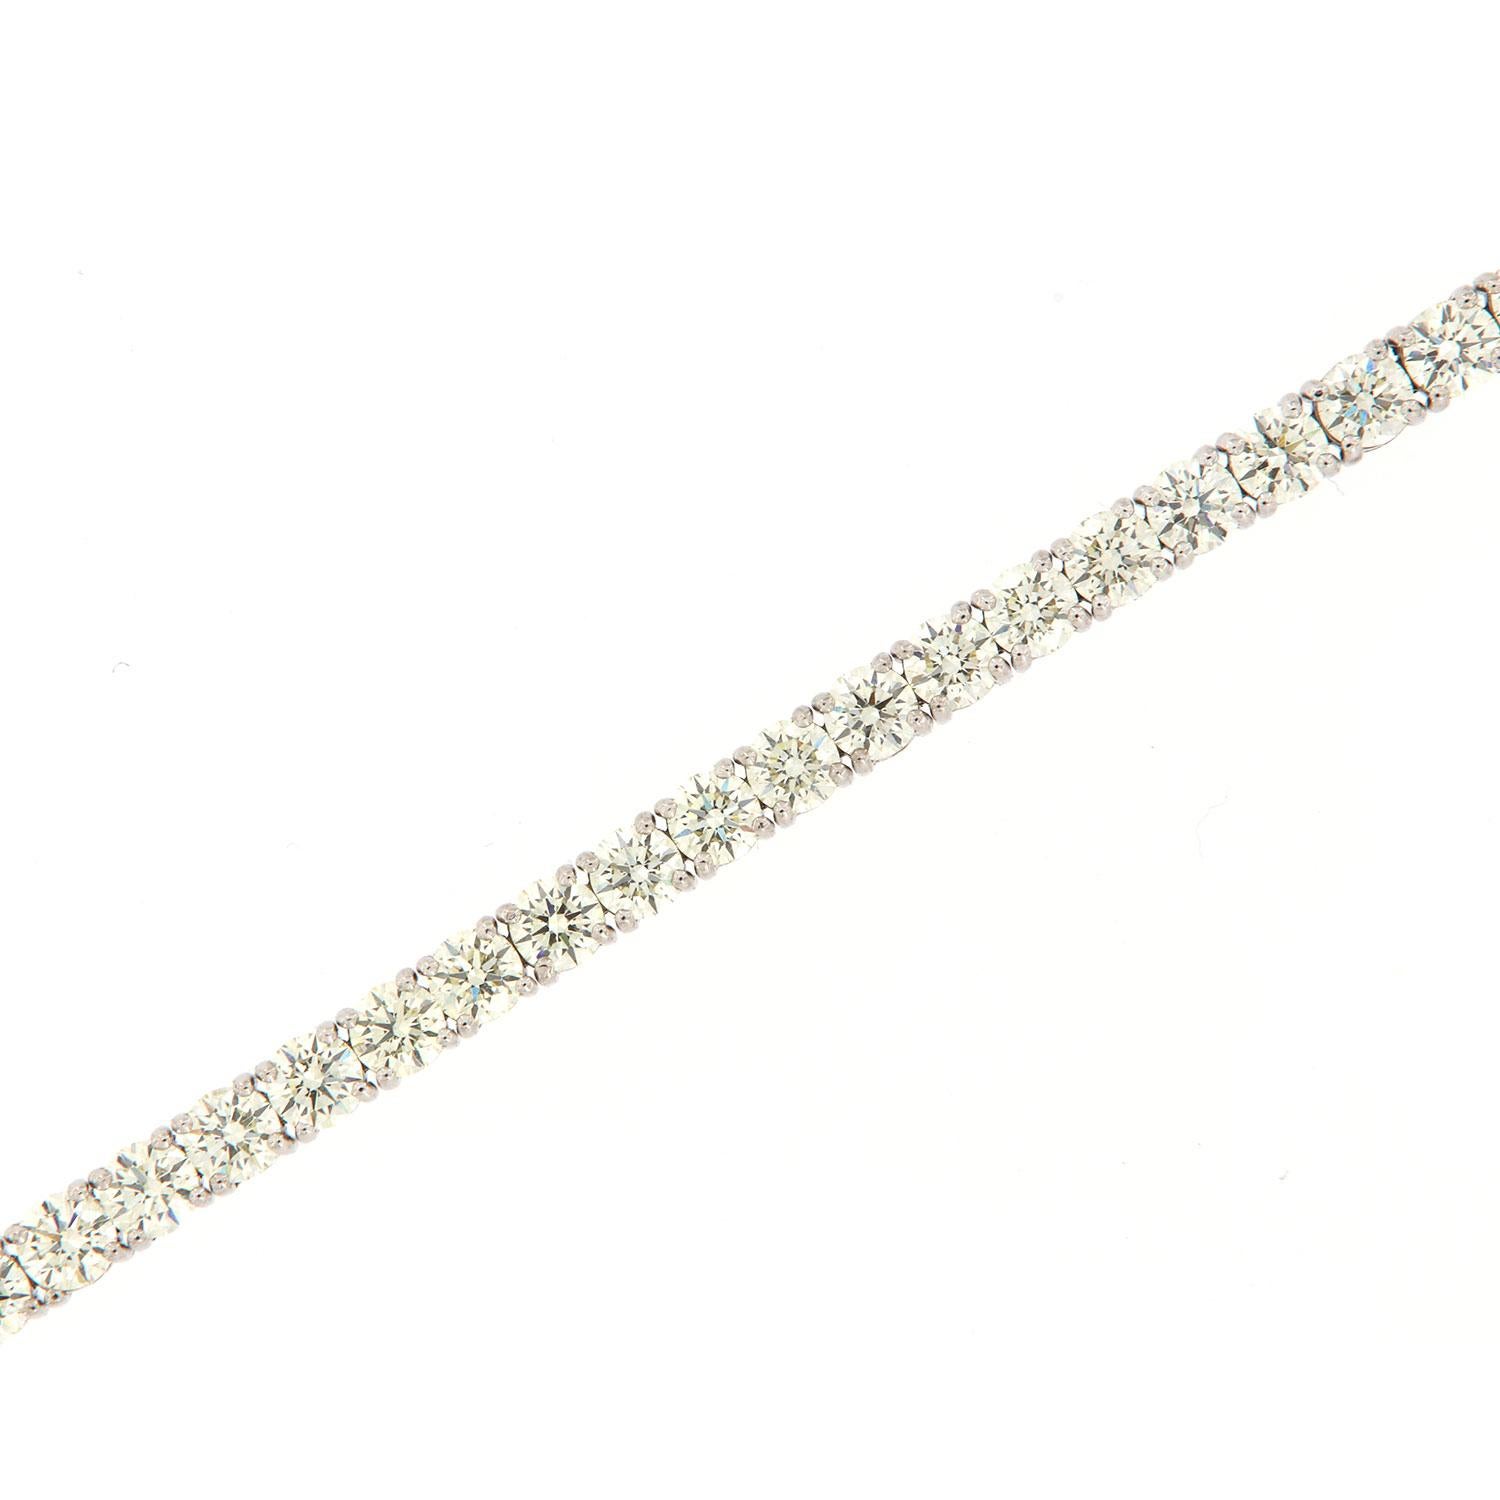 This tennis bracelet features perfectly matched Forty-Four (44) Round shape ideal cut diamonds in a total weight of 11.03 carat set in four (4) prongs 18k white gold. Average color J/K Average clarity VS2 in an excellent luster
The bracelet is 7